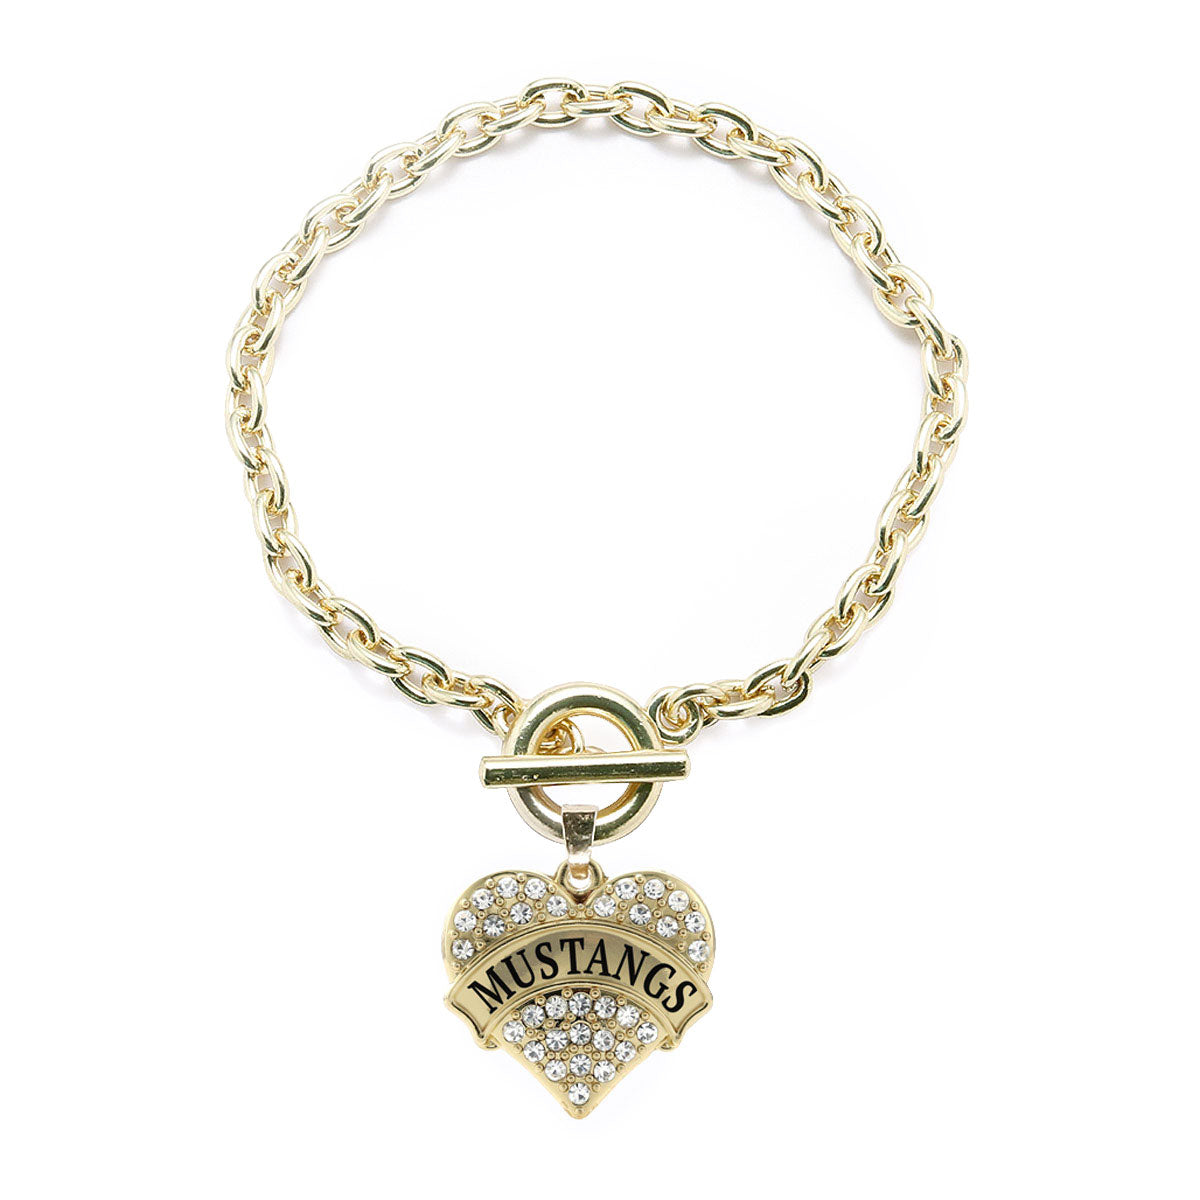 Gold Mustangs Pave Heart Charm Toggle Bracelet